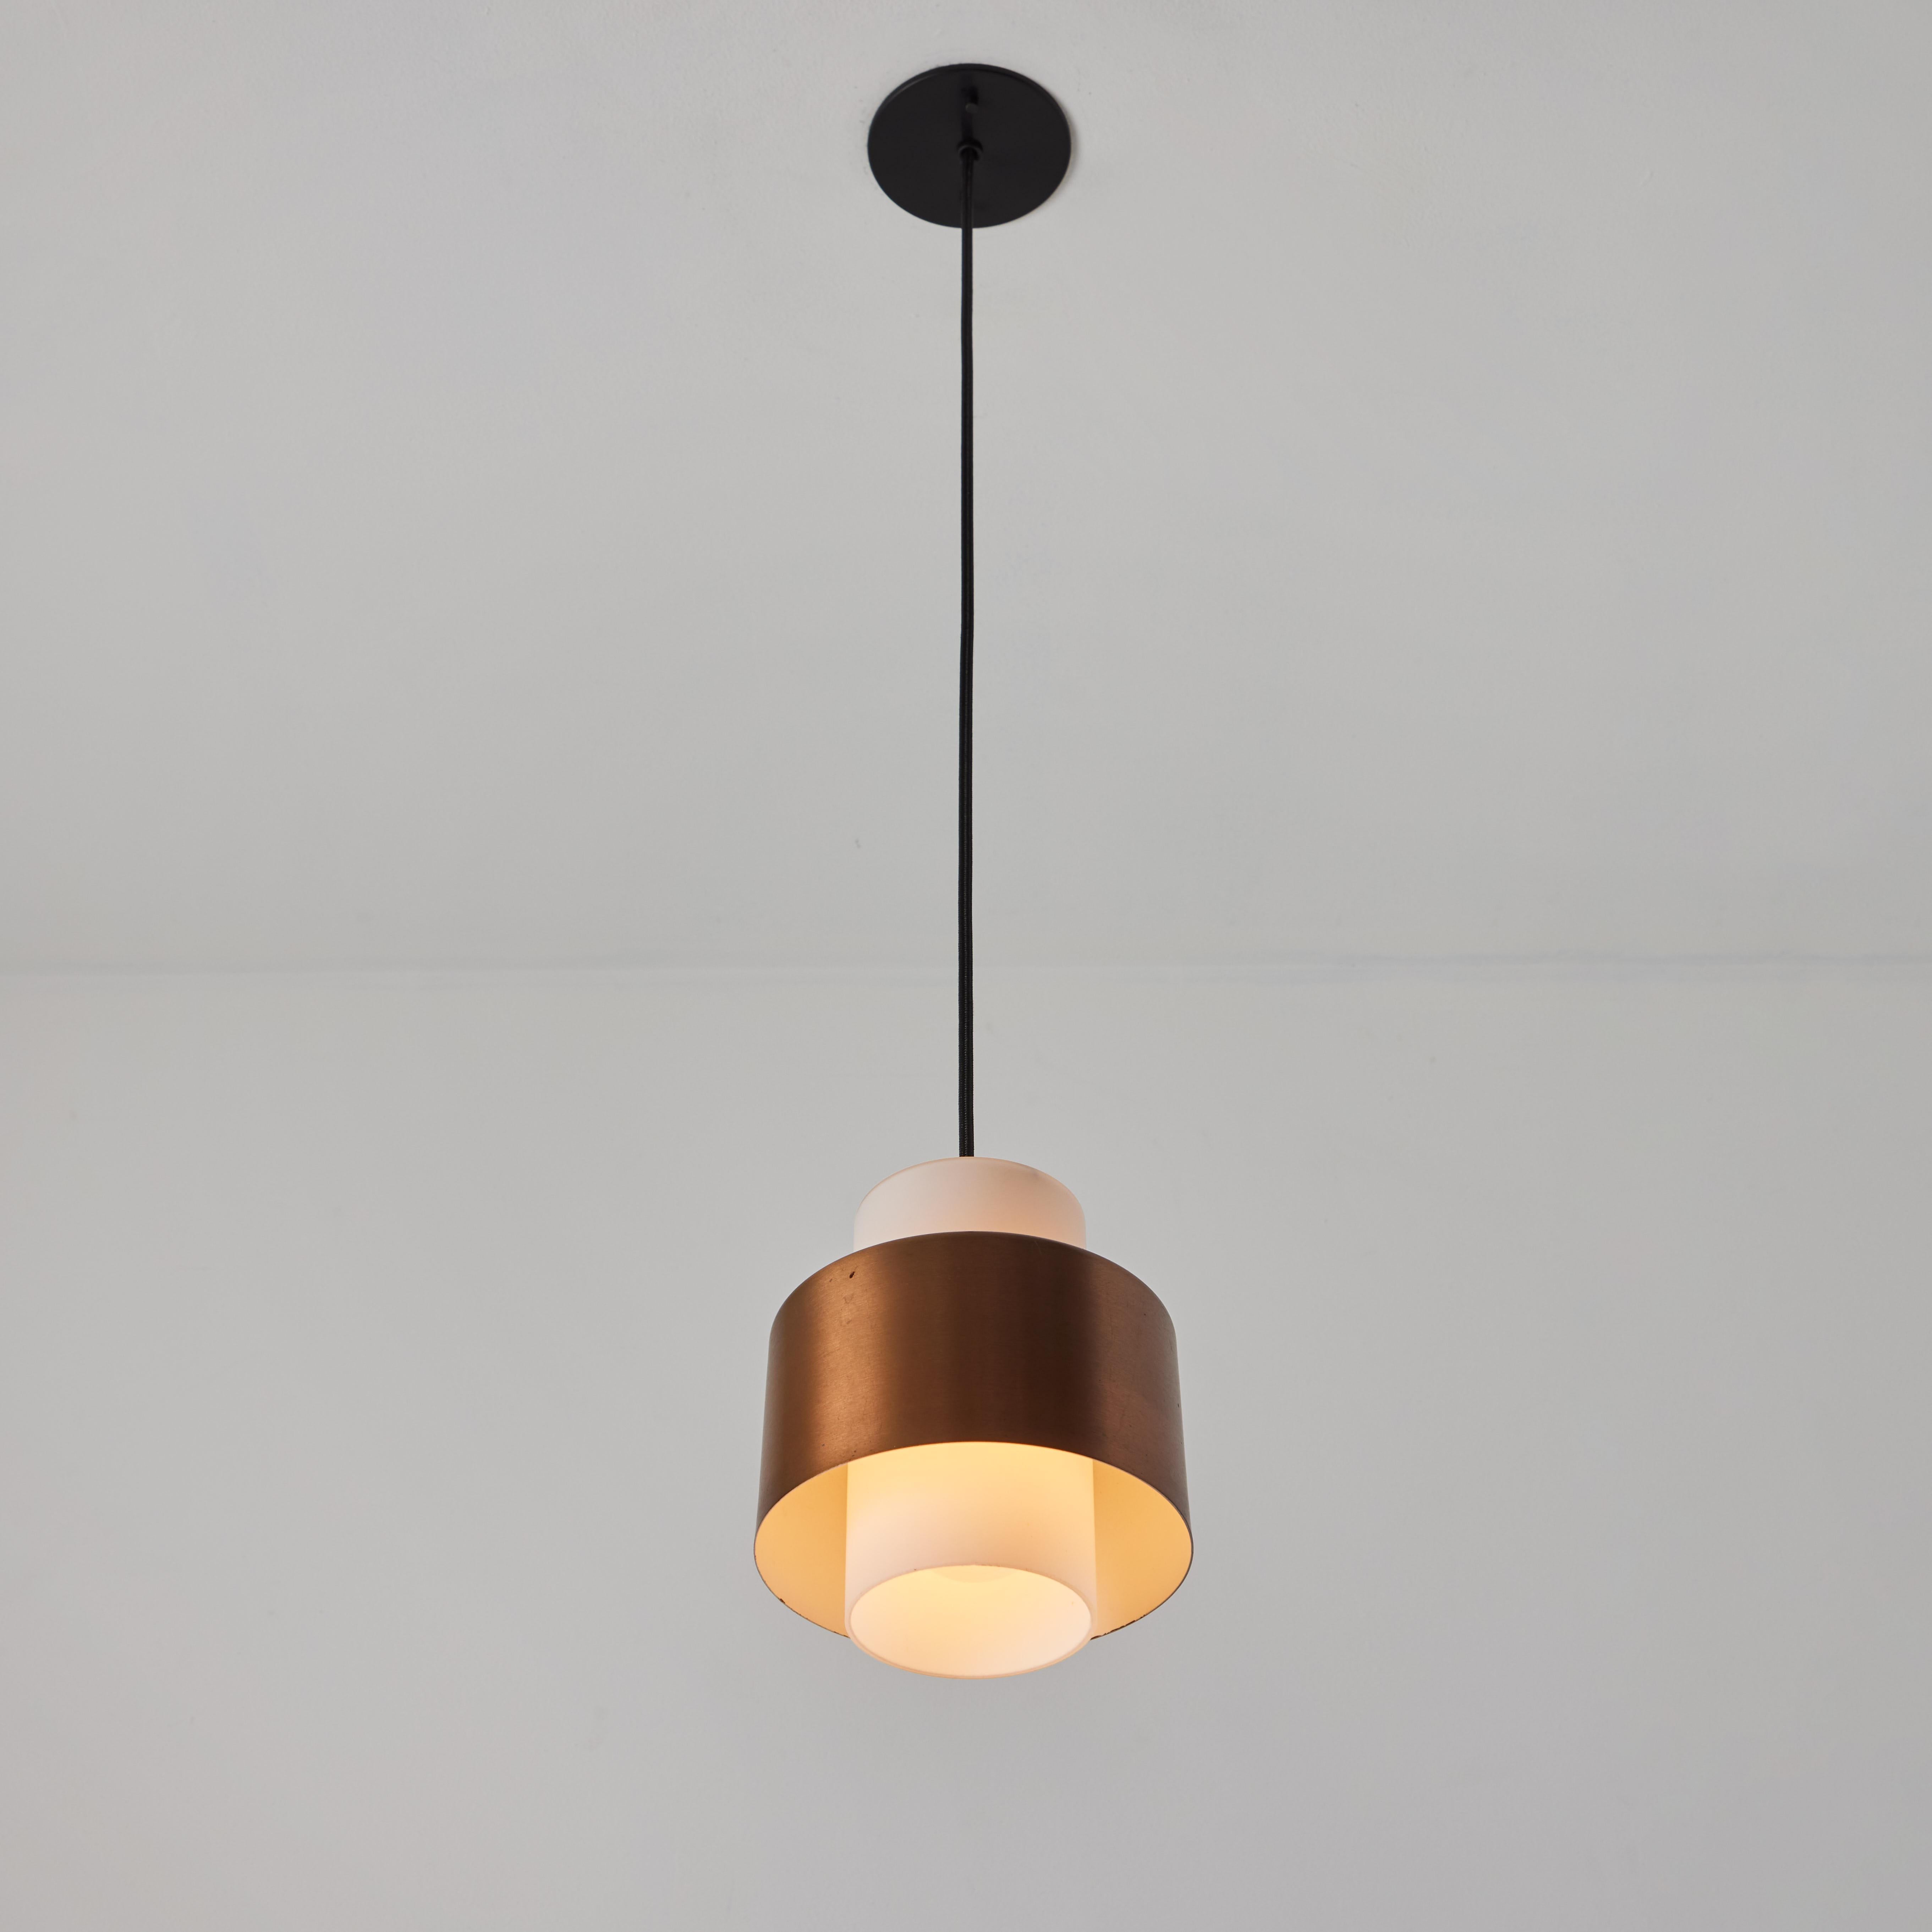 Mid-Century Modern 1960s Opaline Glass & Copper Pendant Lamp Attributed to Stilnovo For Sale